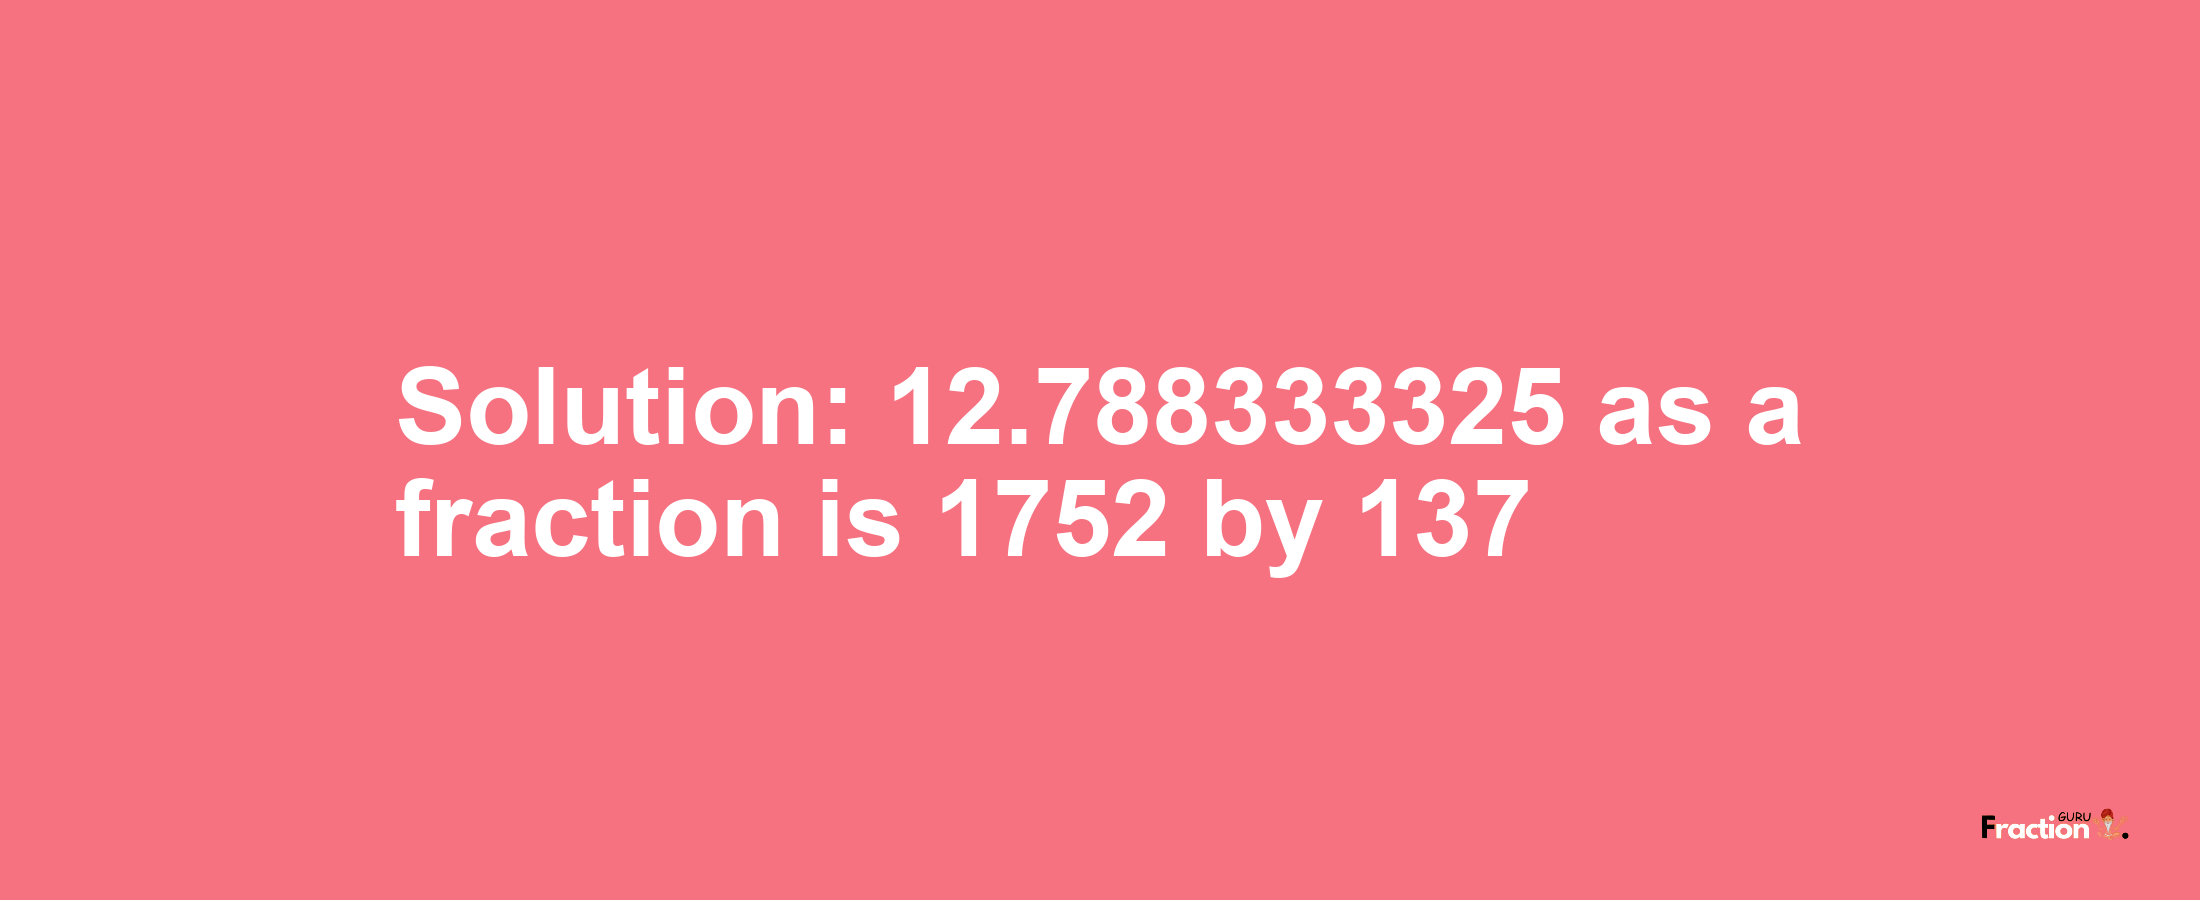 Solution:12.788333325 as a fraction is 1752/137